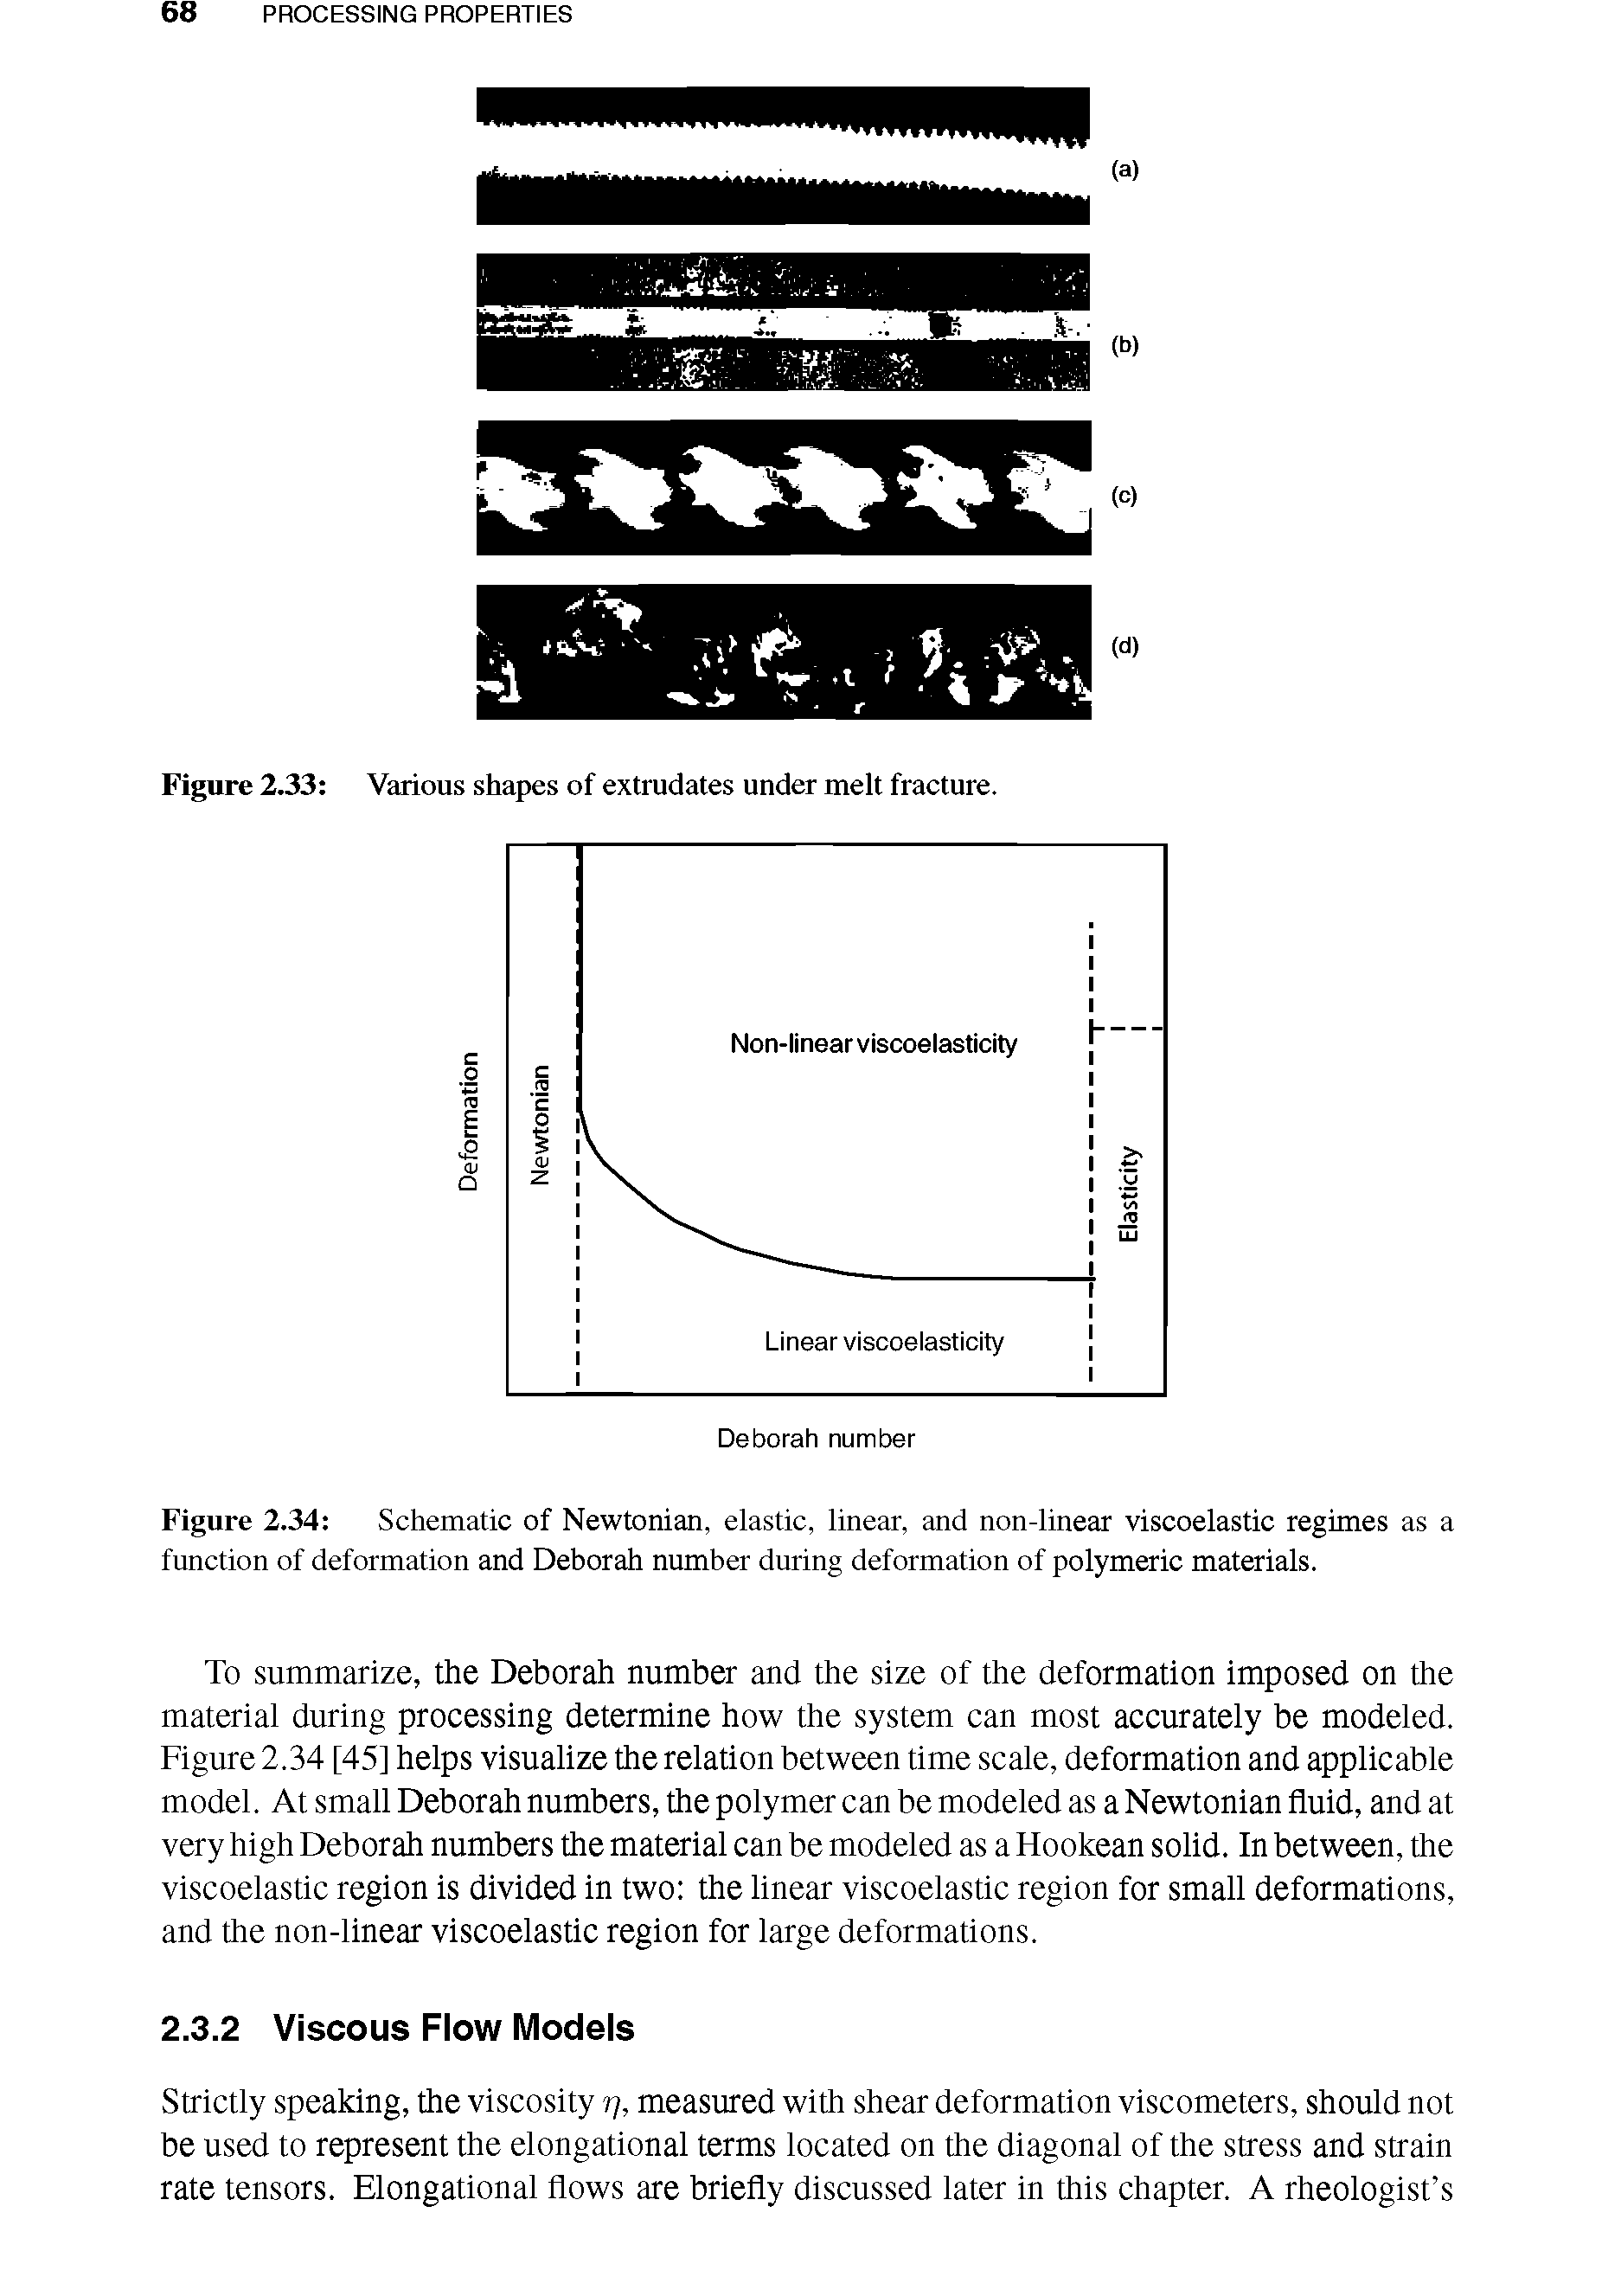 Figure 2.34 Schematic of Newtonian, elastic, linear, and non-linear viscoelastic regimes as a function of deformation and Deborah number during deformation of polymeric materials.